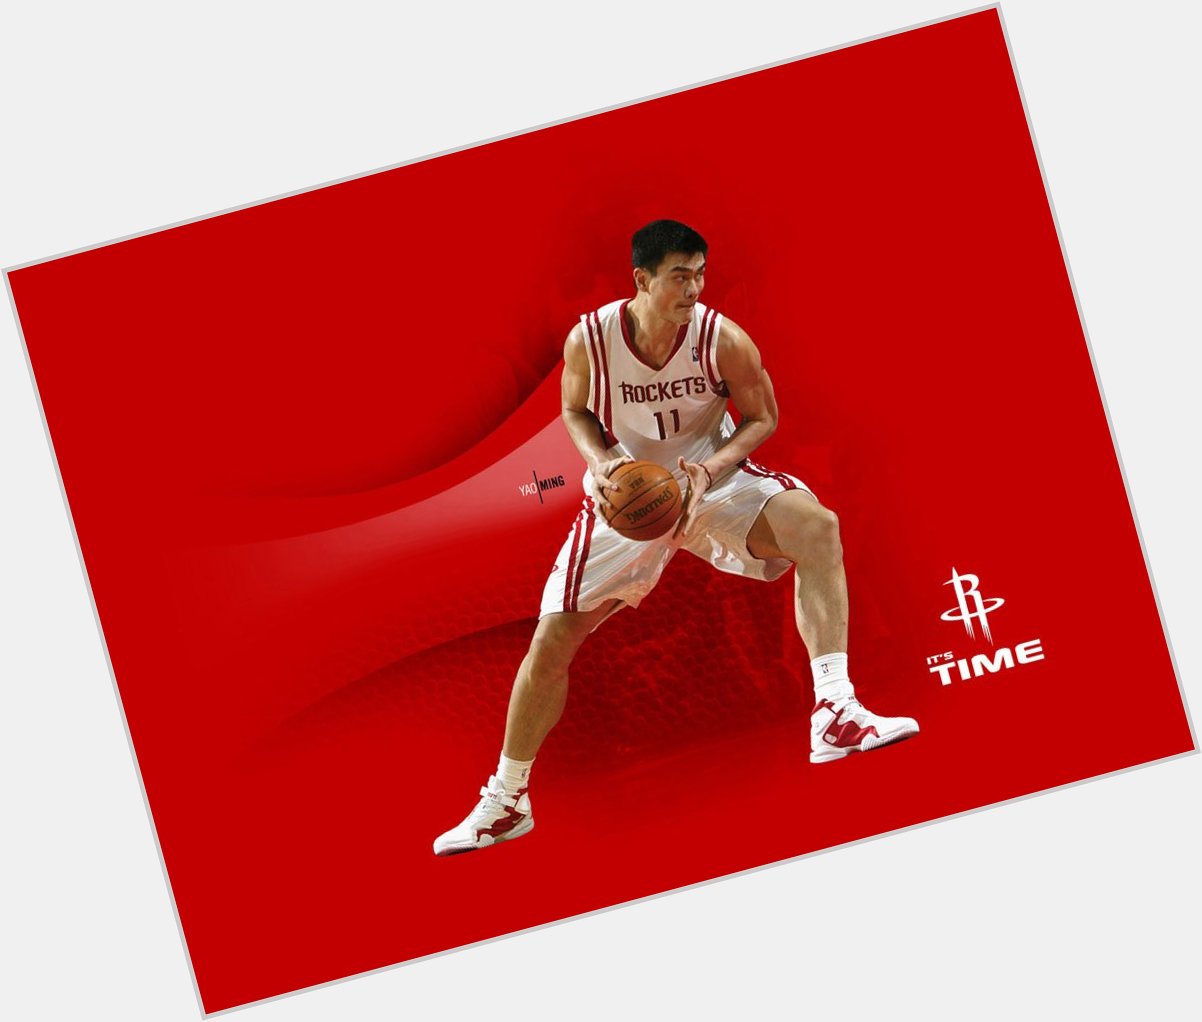 Happy Birthday to Yao Ming who turns 37 today! 